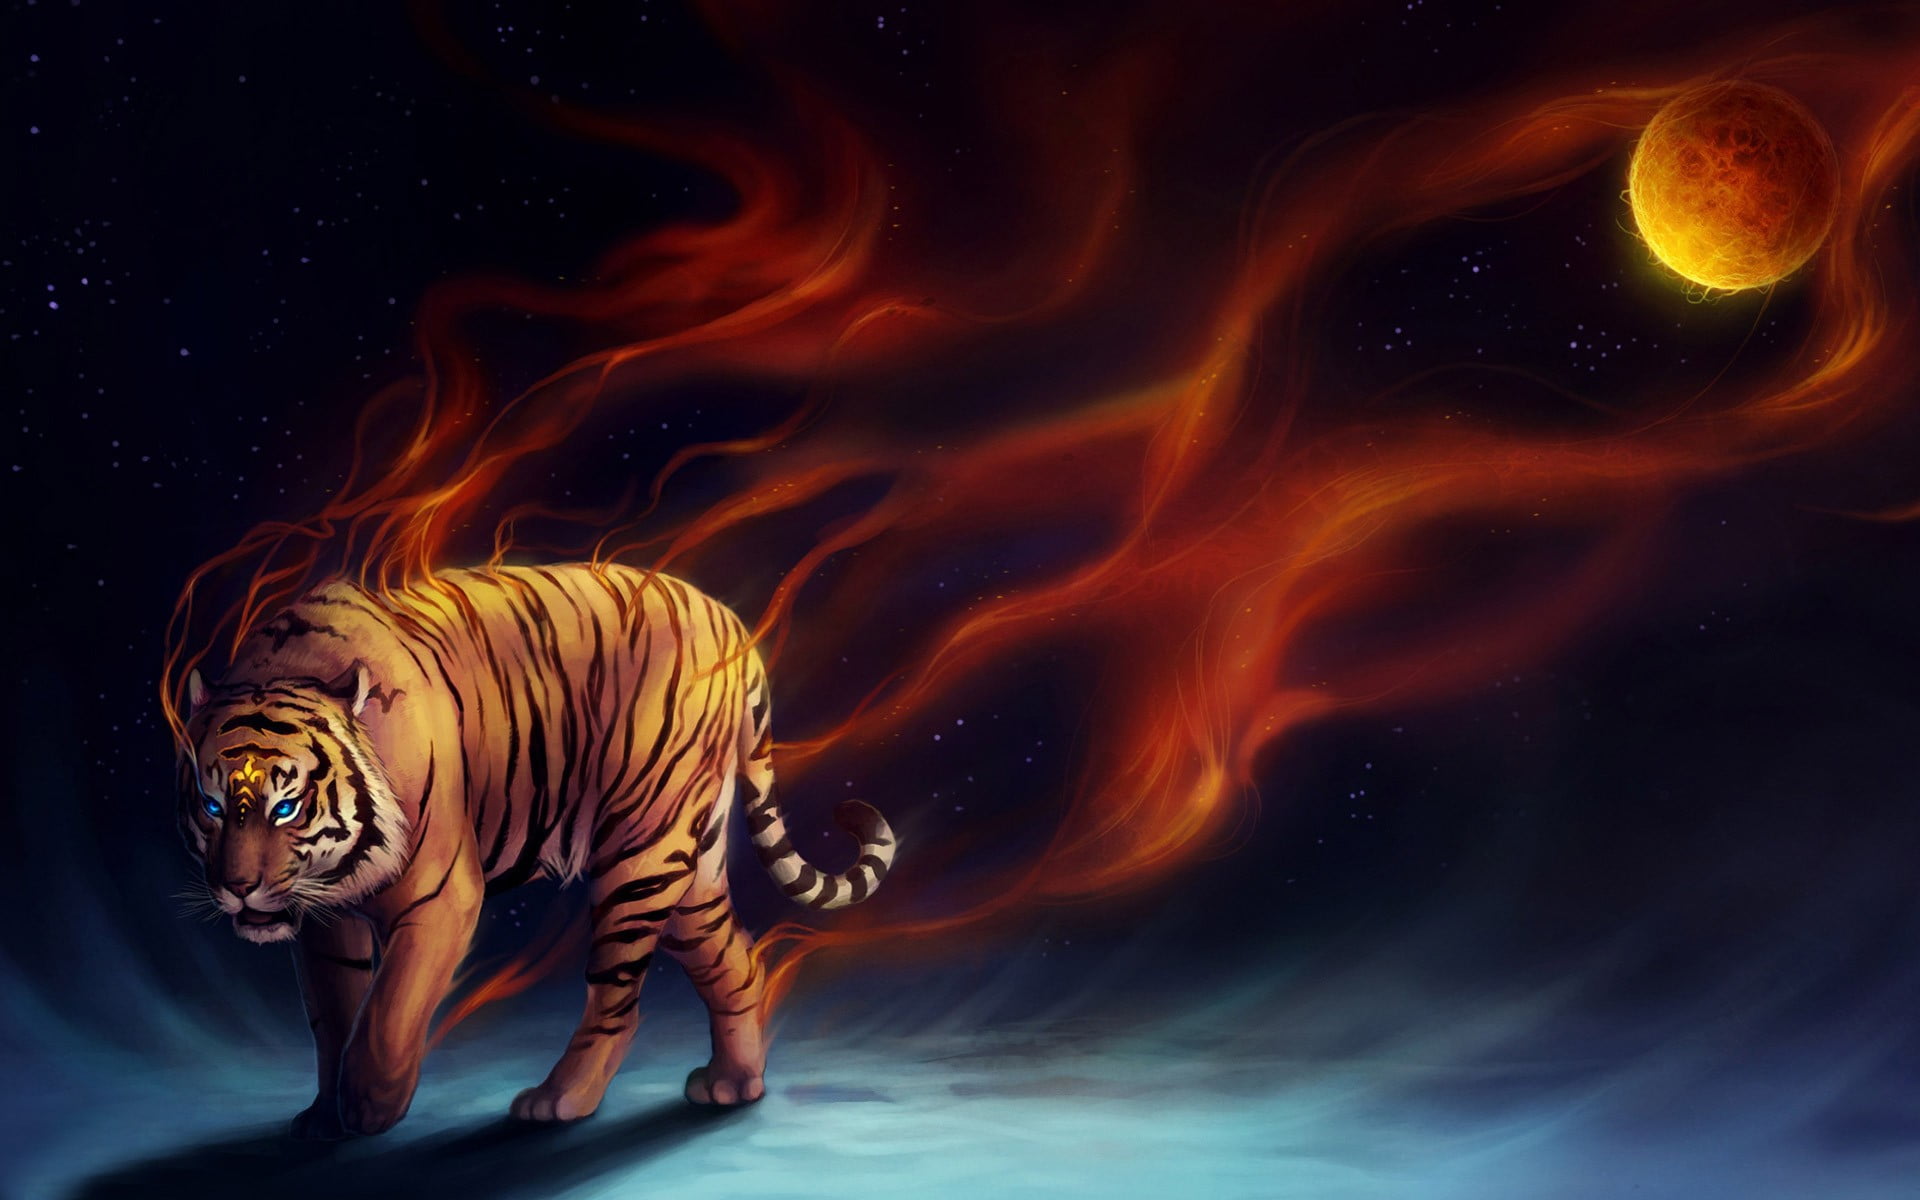 Tiger with red flame wallpaper HD wallpaper | Wallpaper Flare